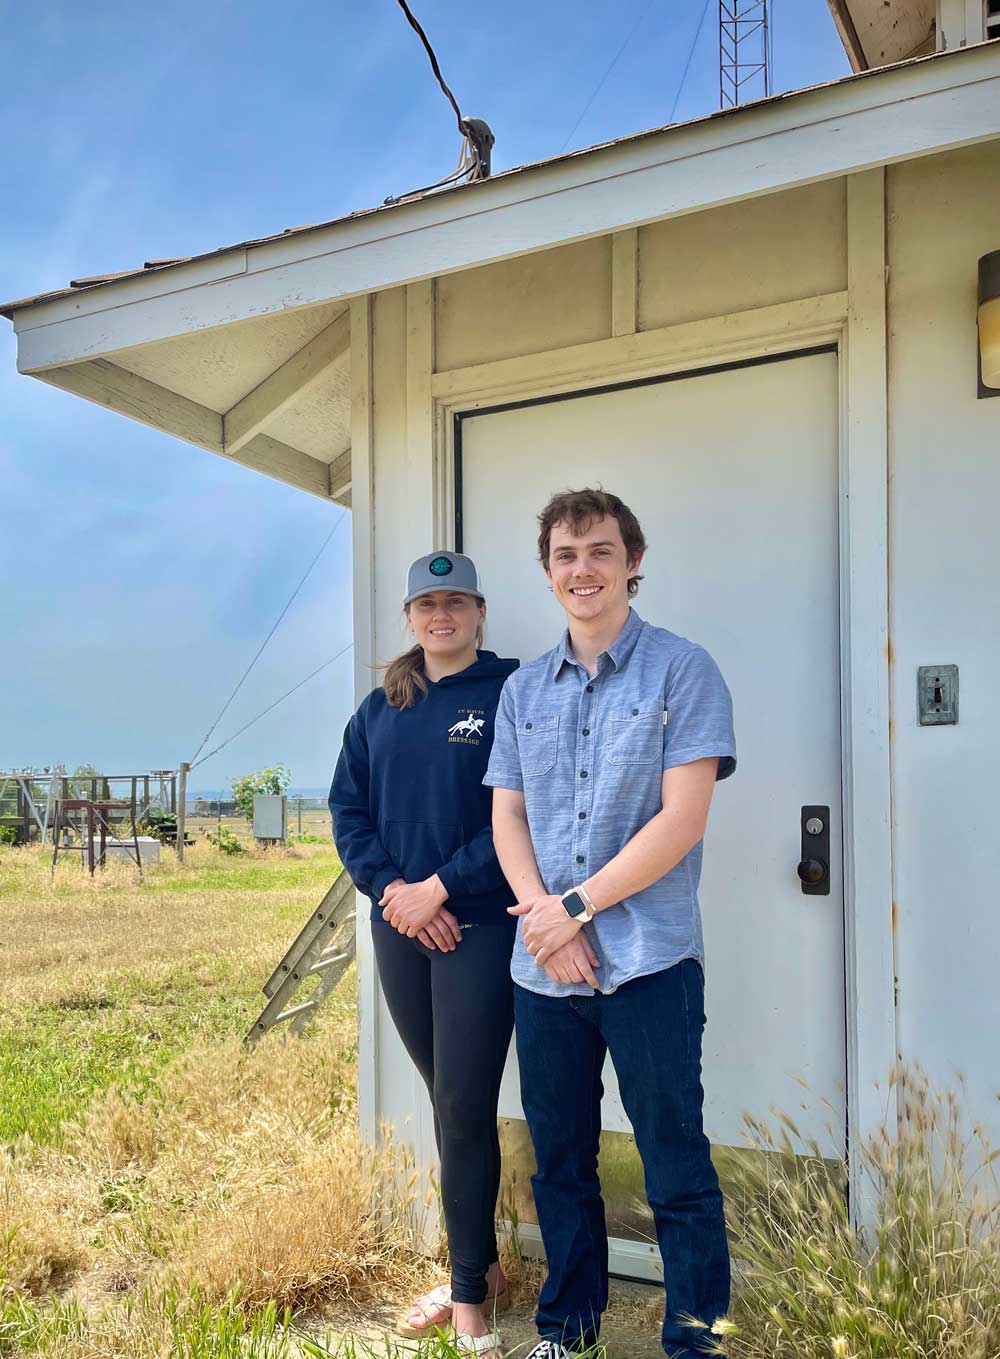 woman and man wearing blue stand in front of white shed in grassy field